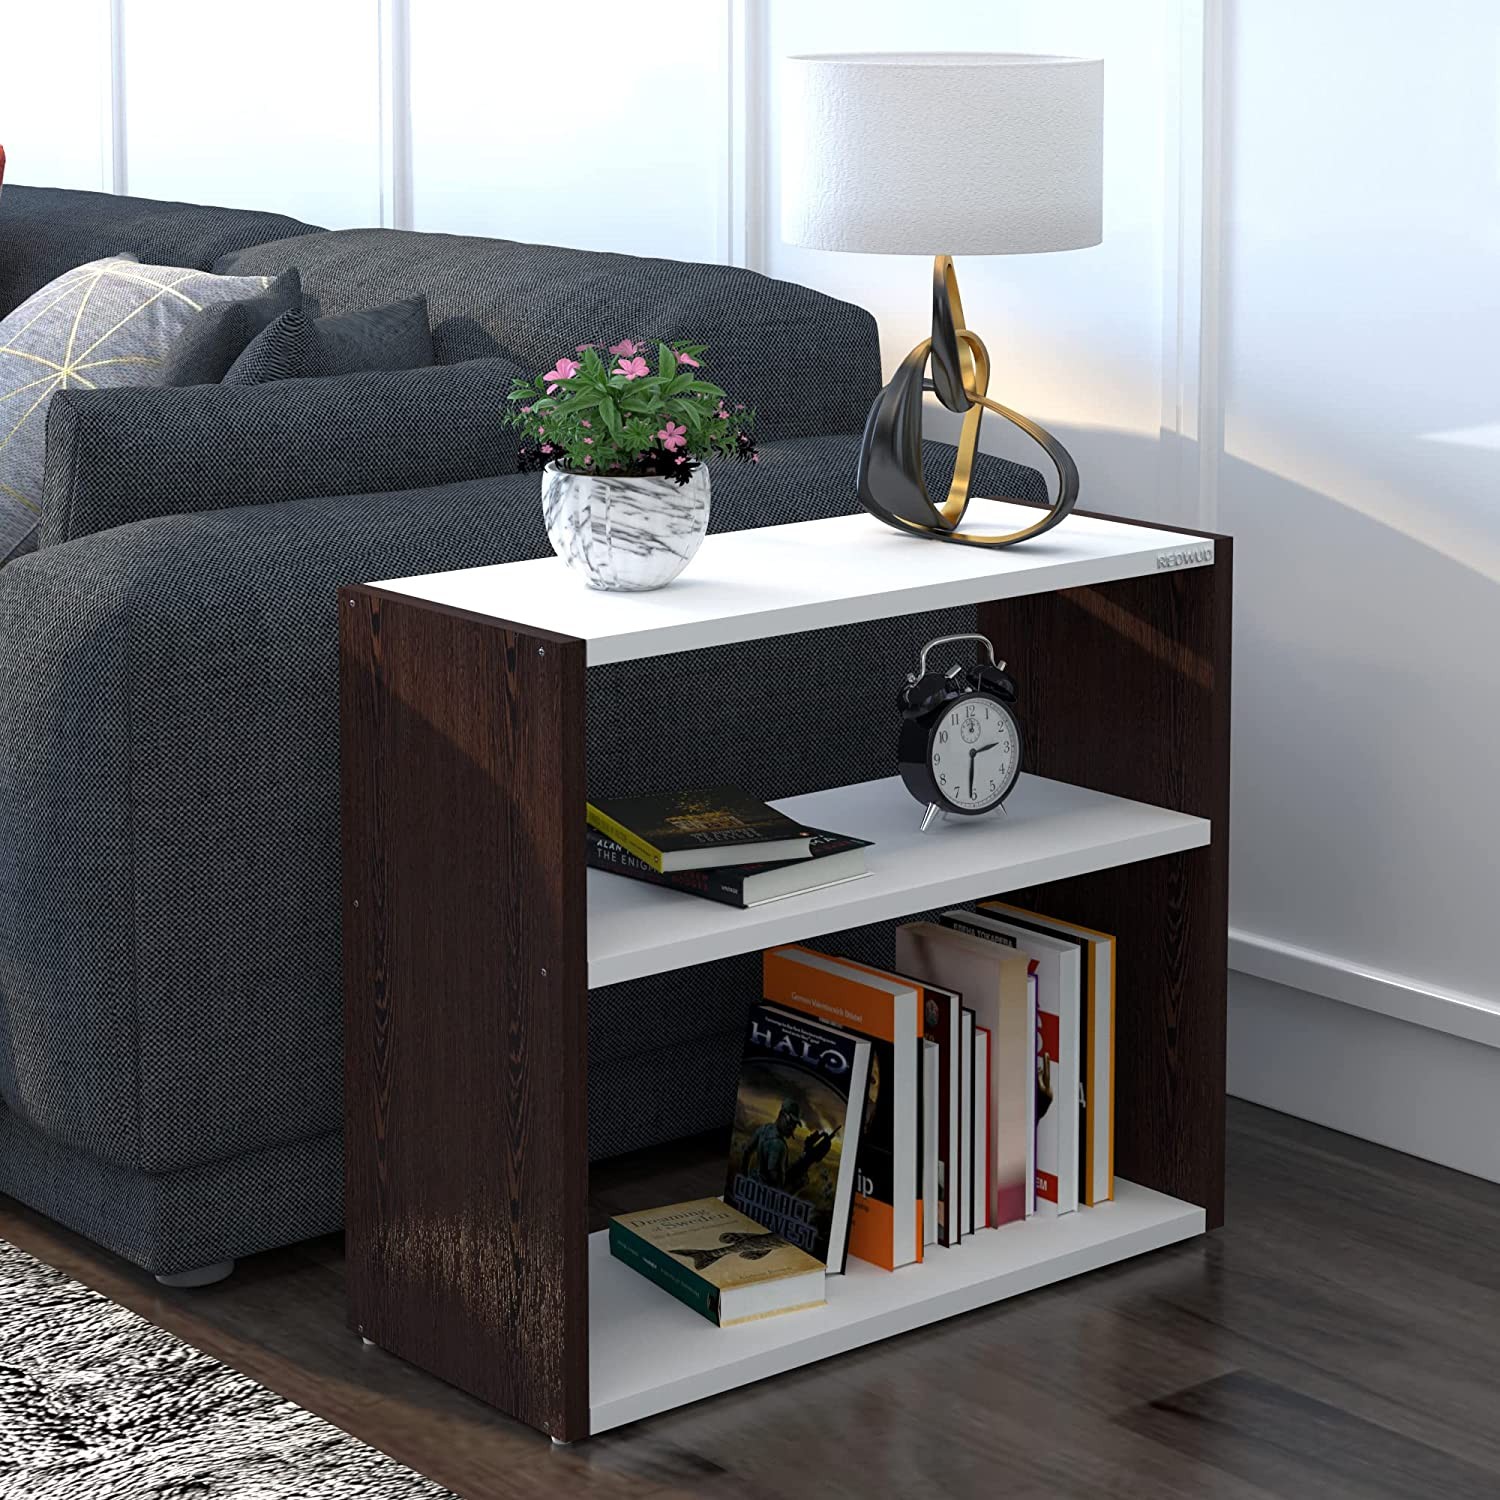 patricia-engineered-wood-bedside-table-end-table-wenge-white-rd-patricia-wwt